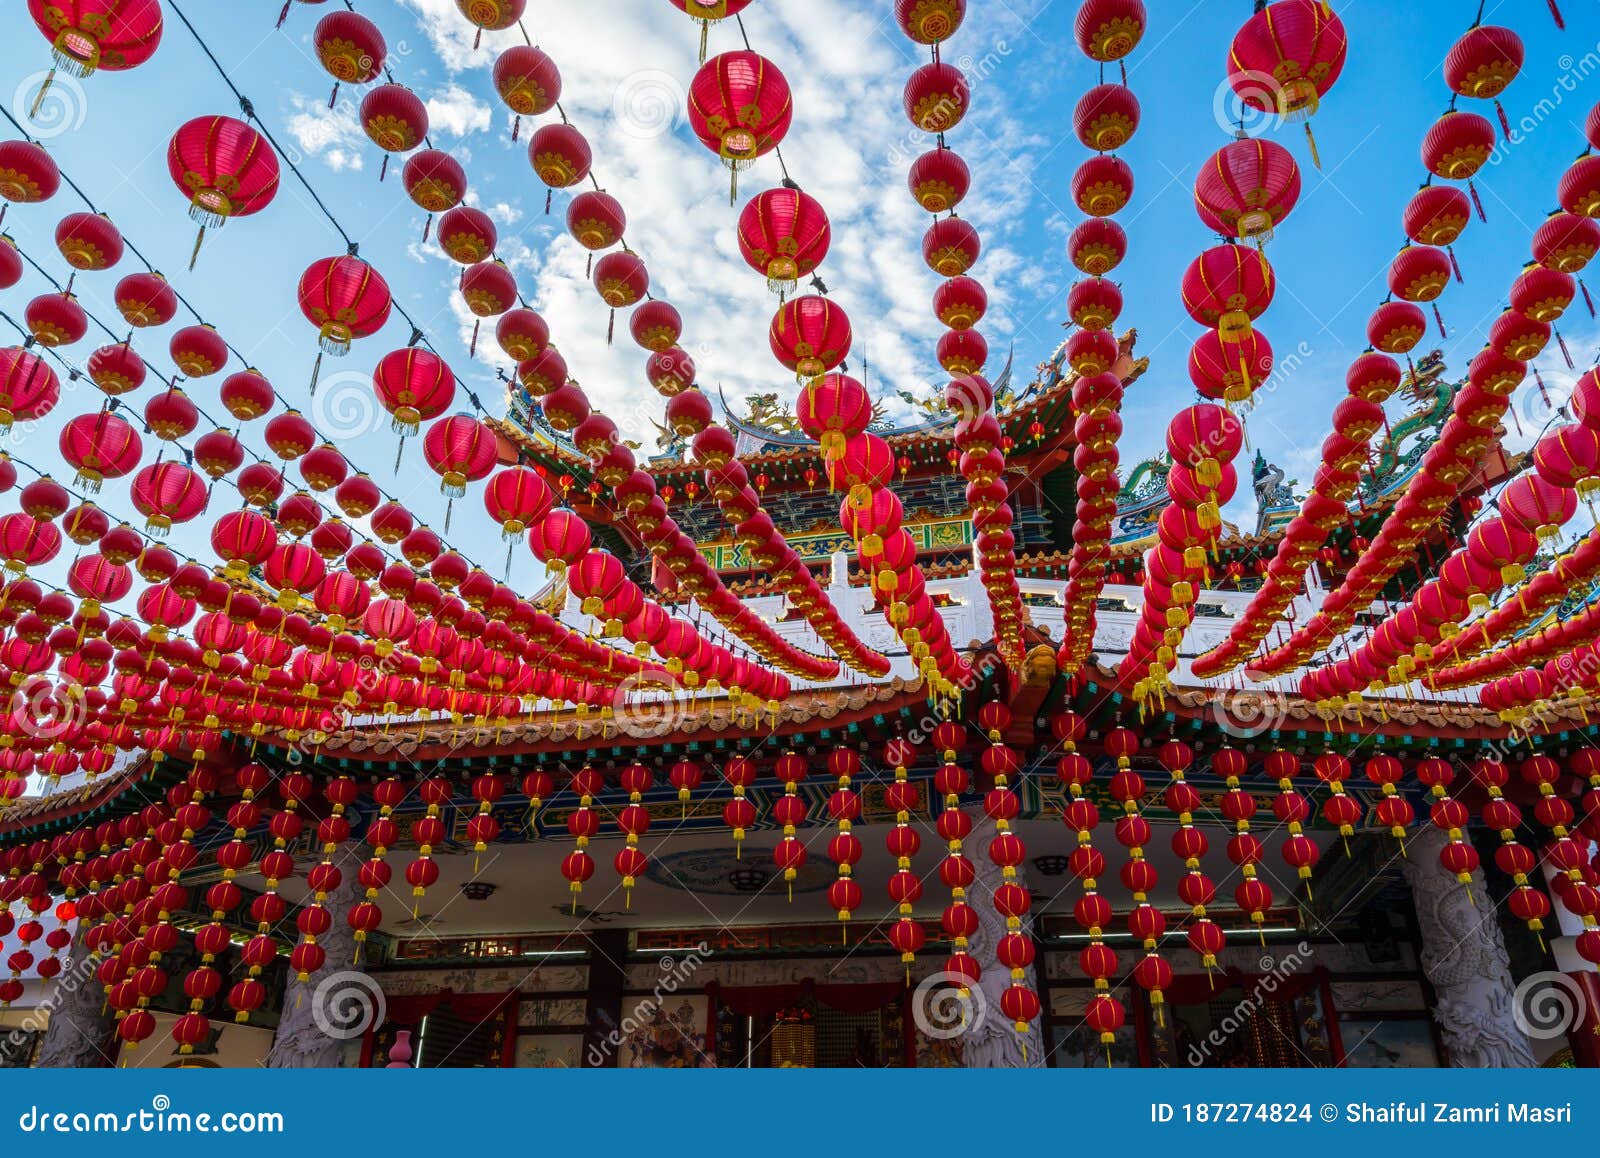 Traditional Chinese Lanterns Display during Chinese New Year Festival ...